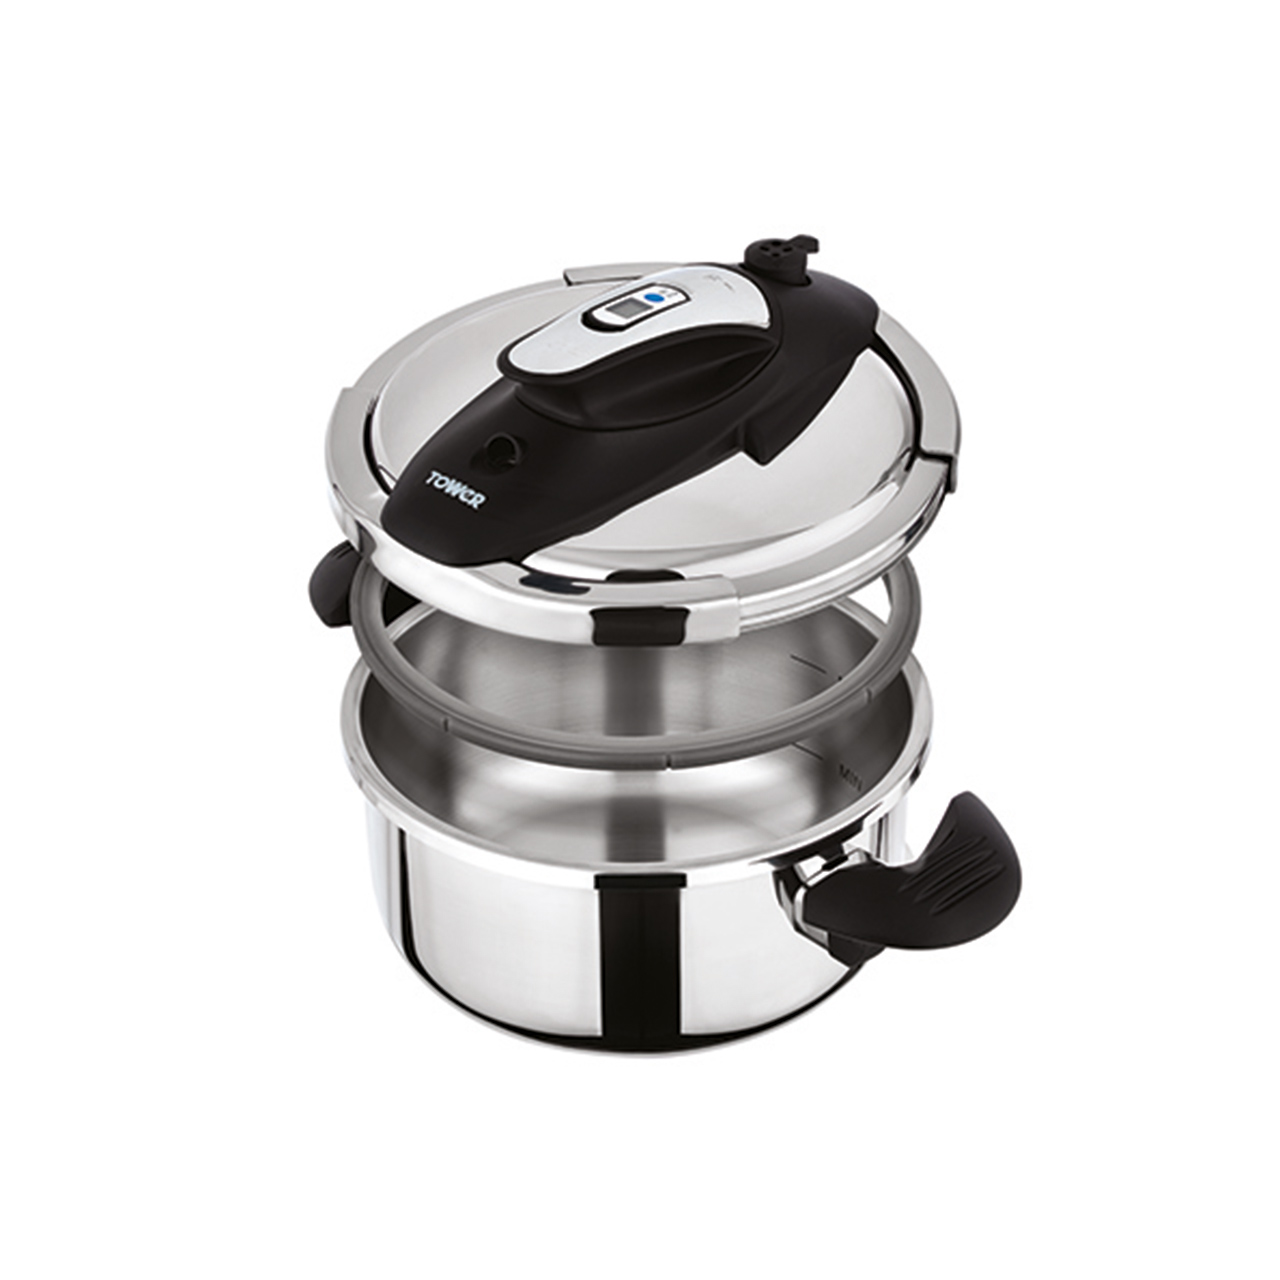 One-Touch 4 Litre Pressure Cooker